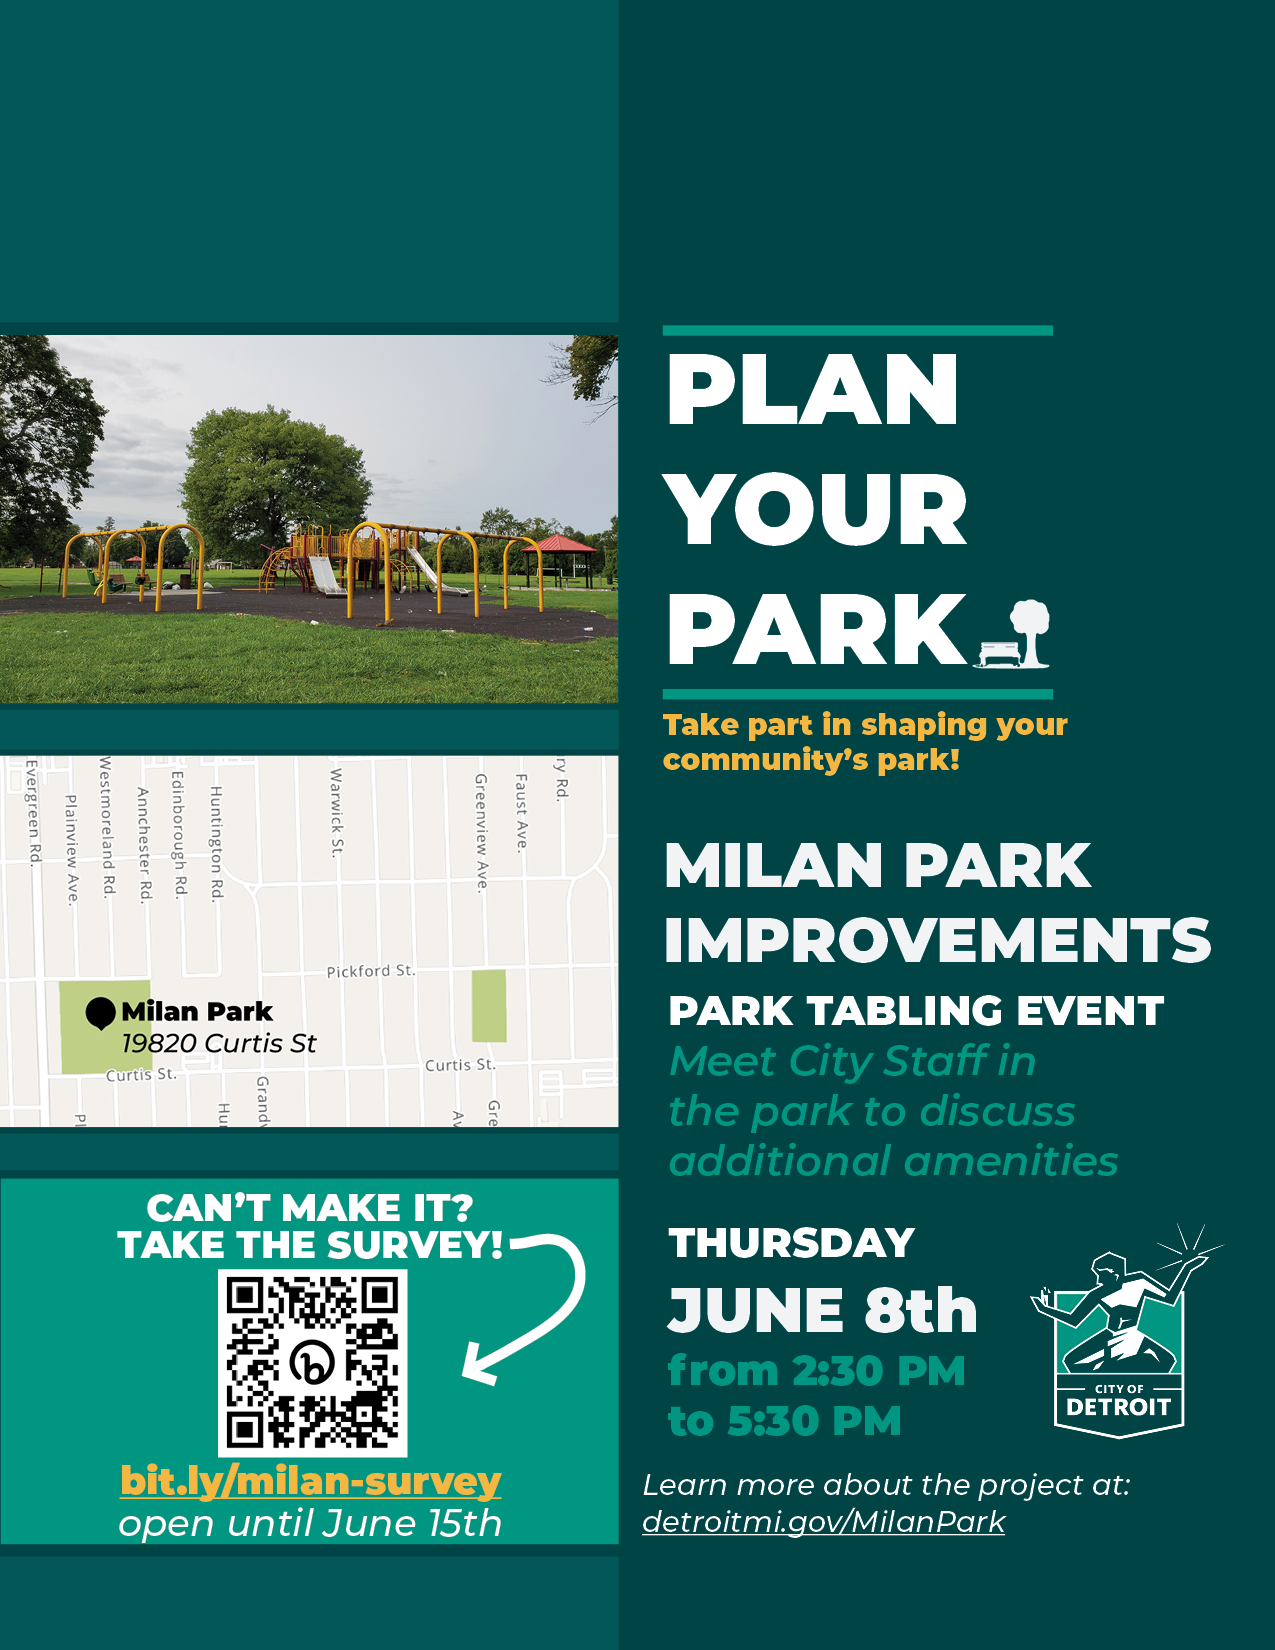 Park tabling event June 8th at 2:30pm to 5:30pm